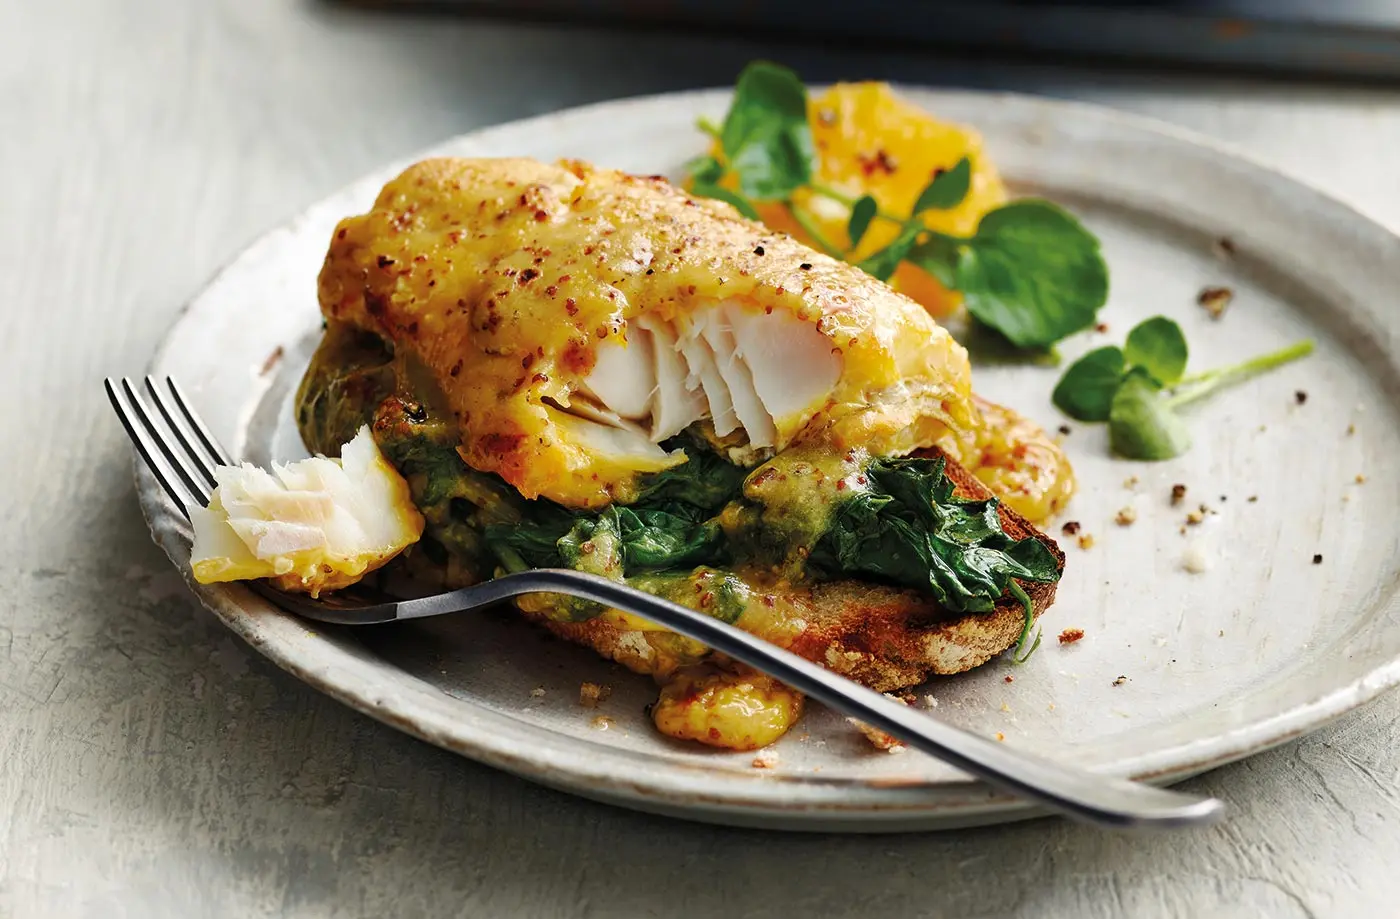 another name for smoked haddock - What is a synonym for smoked haddock